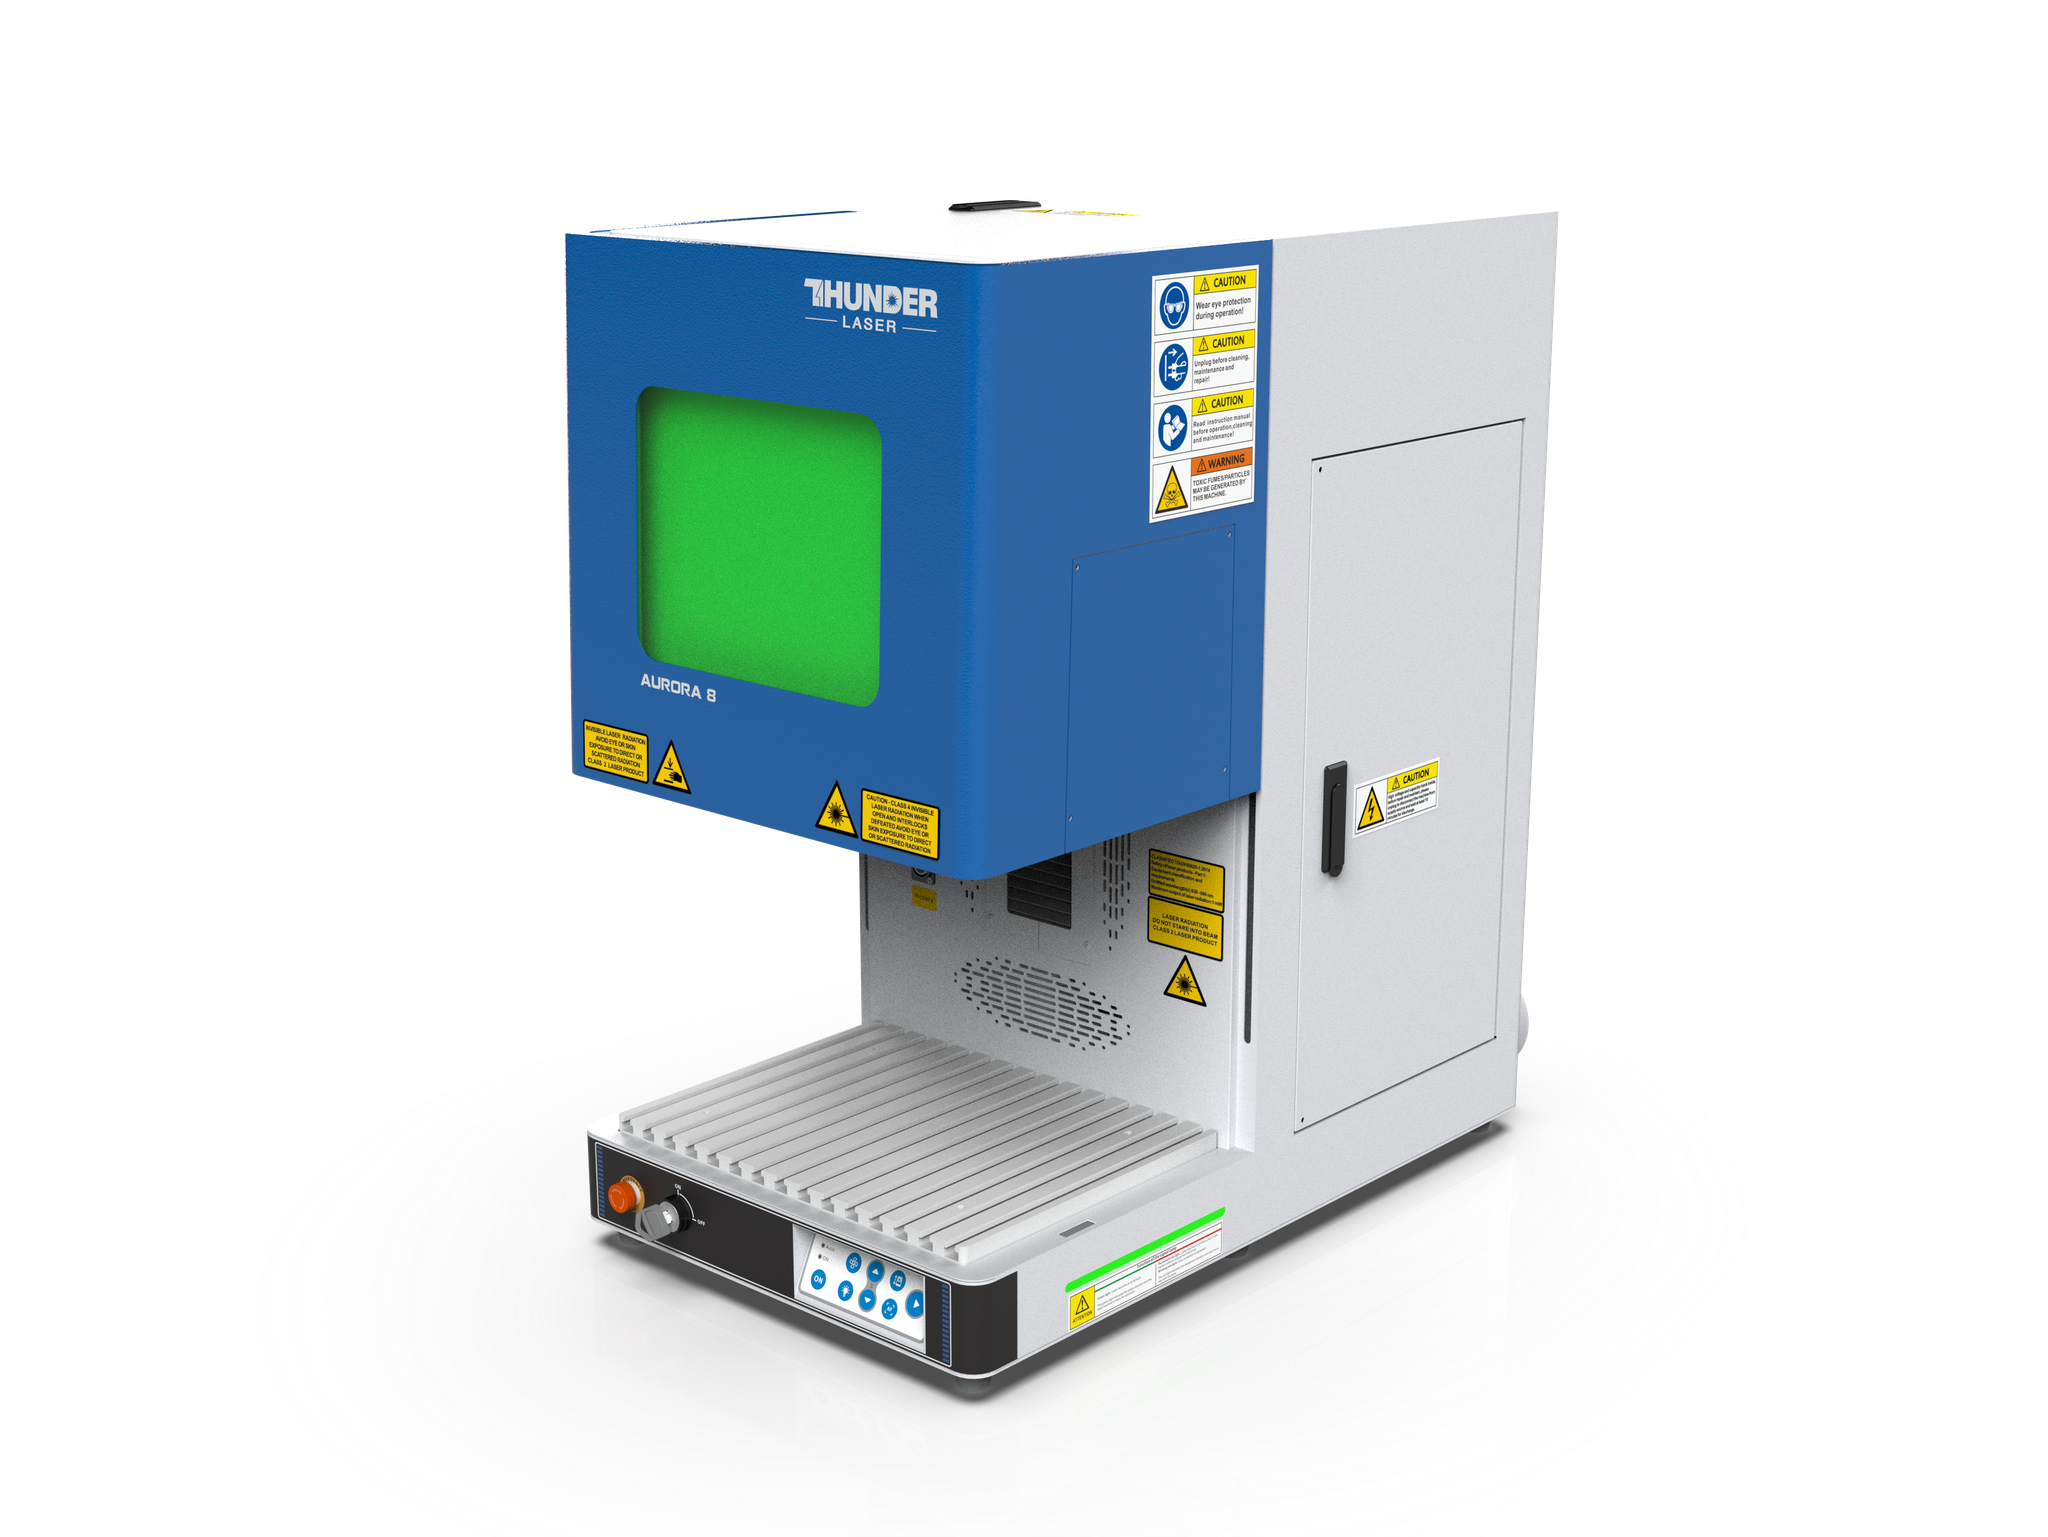 a photo of the new improved version of the Aurora laser marking machine by Thunder laser. It is a small upright machine that can sit on a table top. It has a blue box lid that slides up and down and the window in the lid is green. The machine itself is white